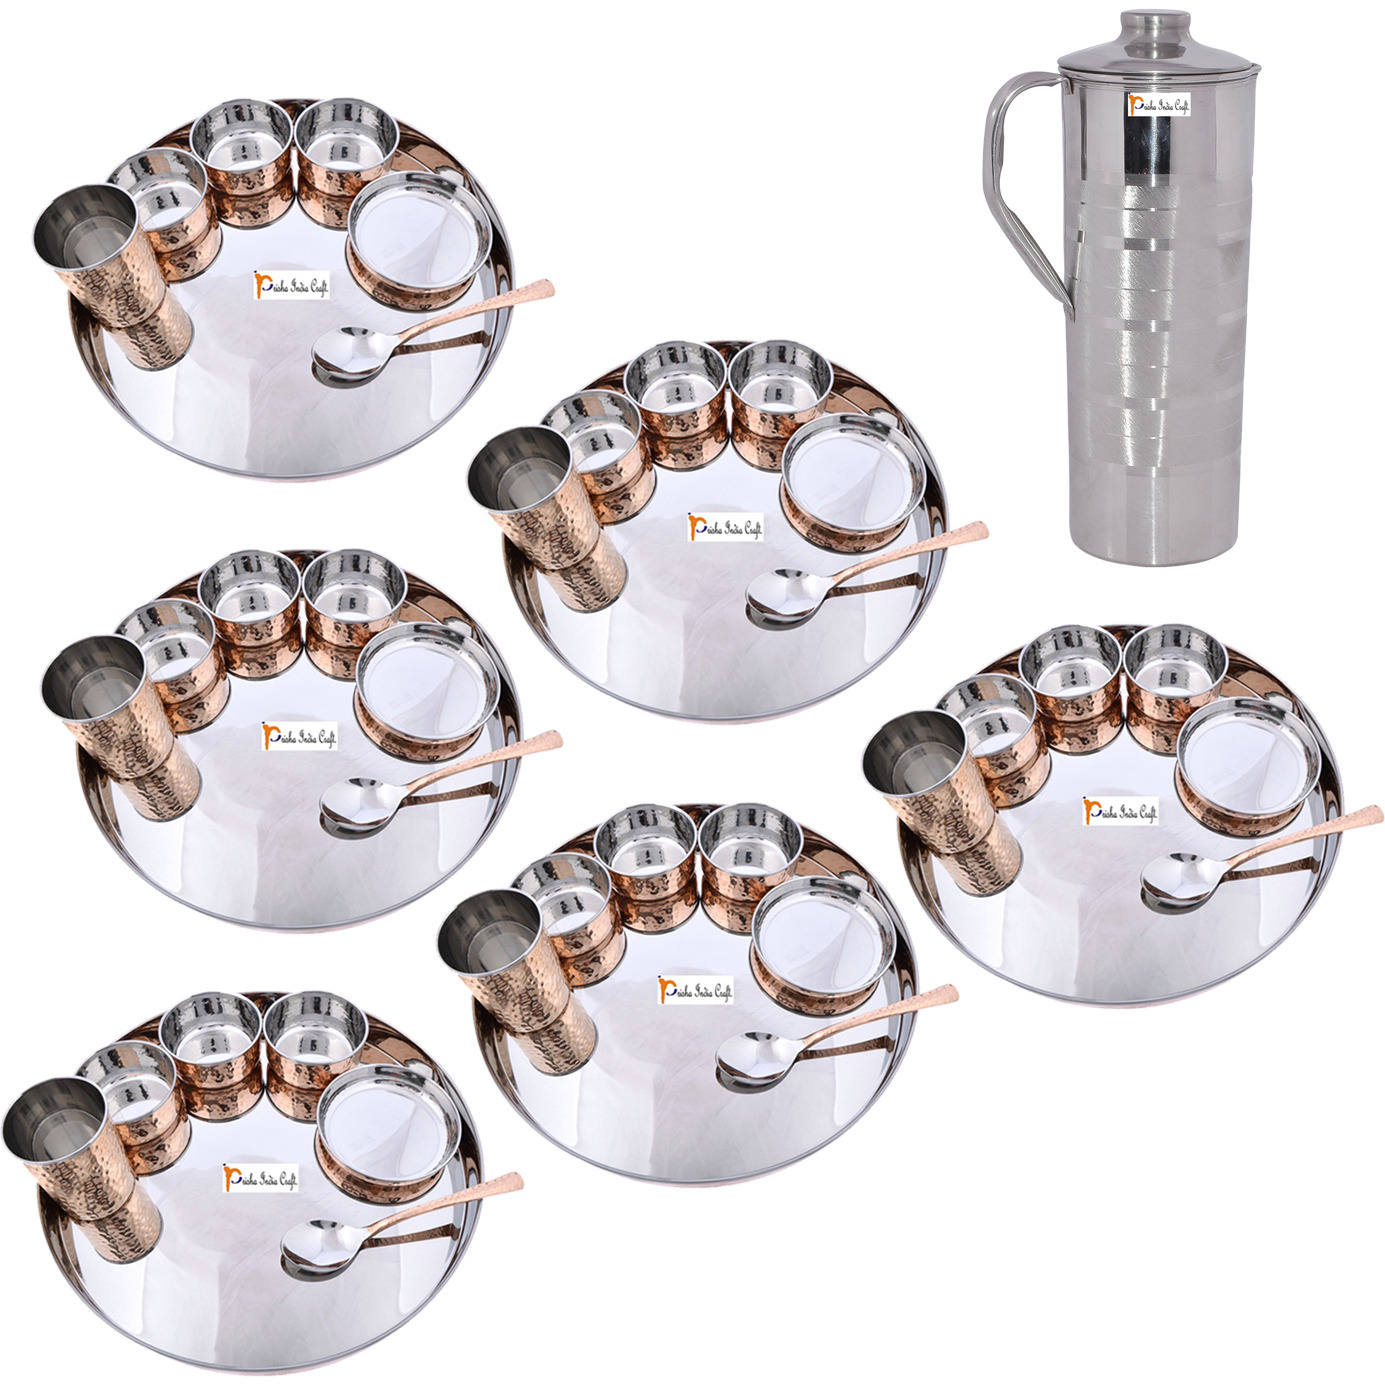 Prisha India Craft B. Set of 6 Dinnerware Traditional Stainless Steel Copper Dinner Set of Thali Plate, Bowls, Glass and Spoon, Dia 13  With 1 Luxury Style Stainless Steel Copper Pitcher Jug - Christmas Gift